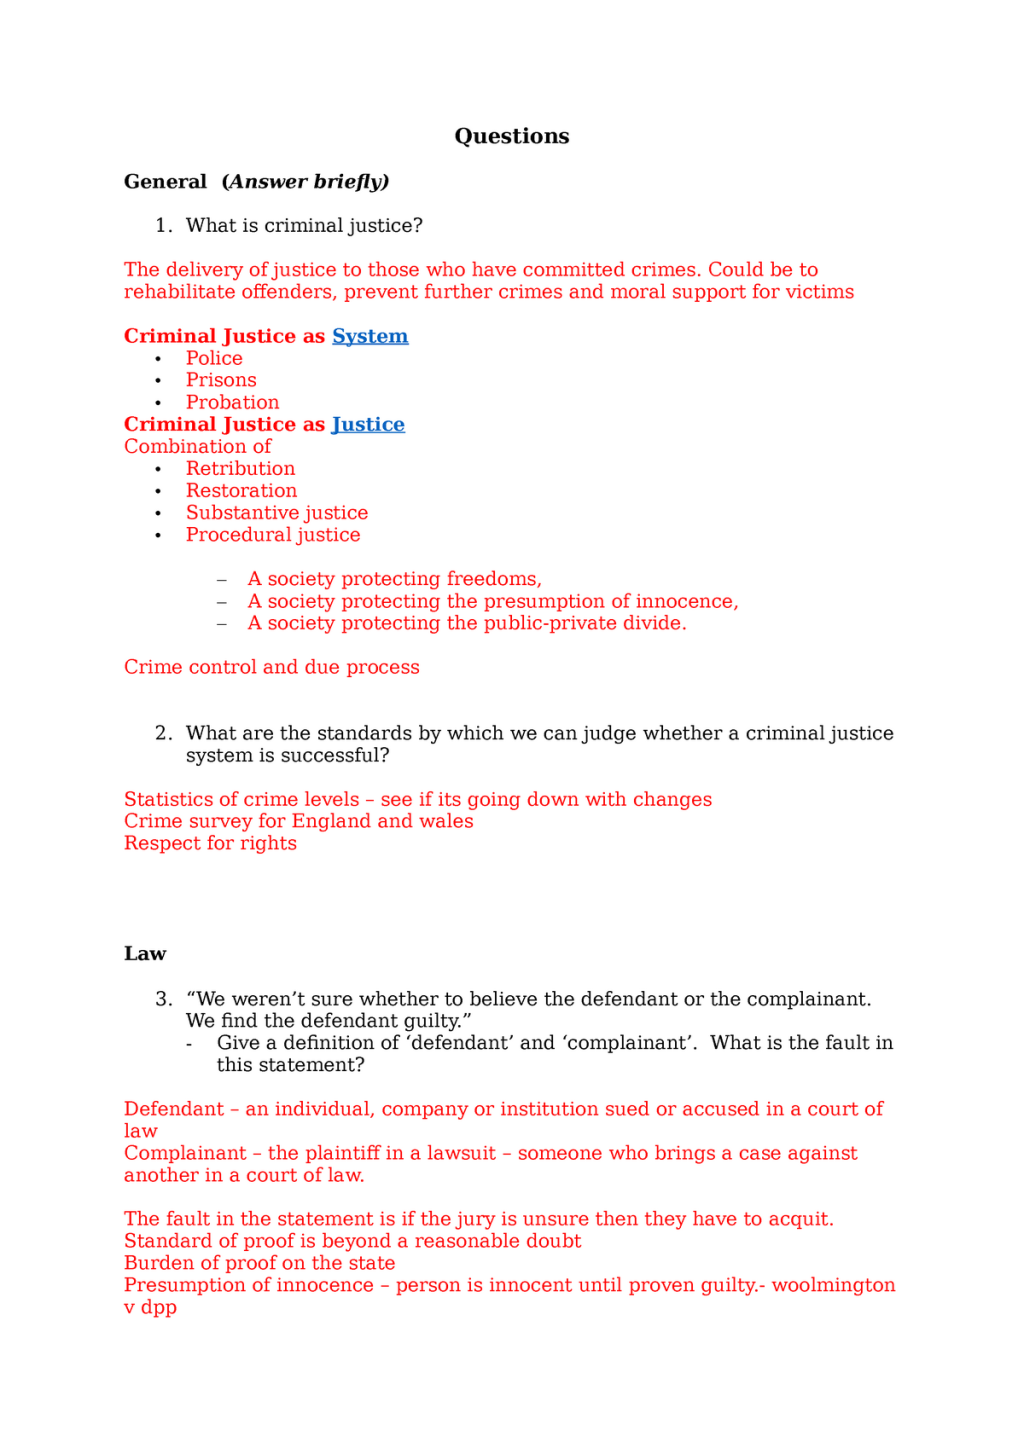 Picture of: Law Justice and Society tutorial  – Questions General (Answer